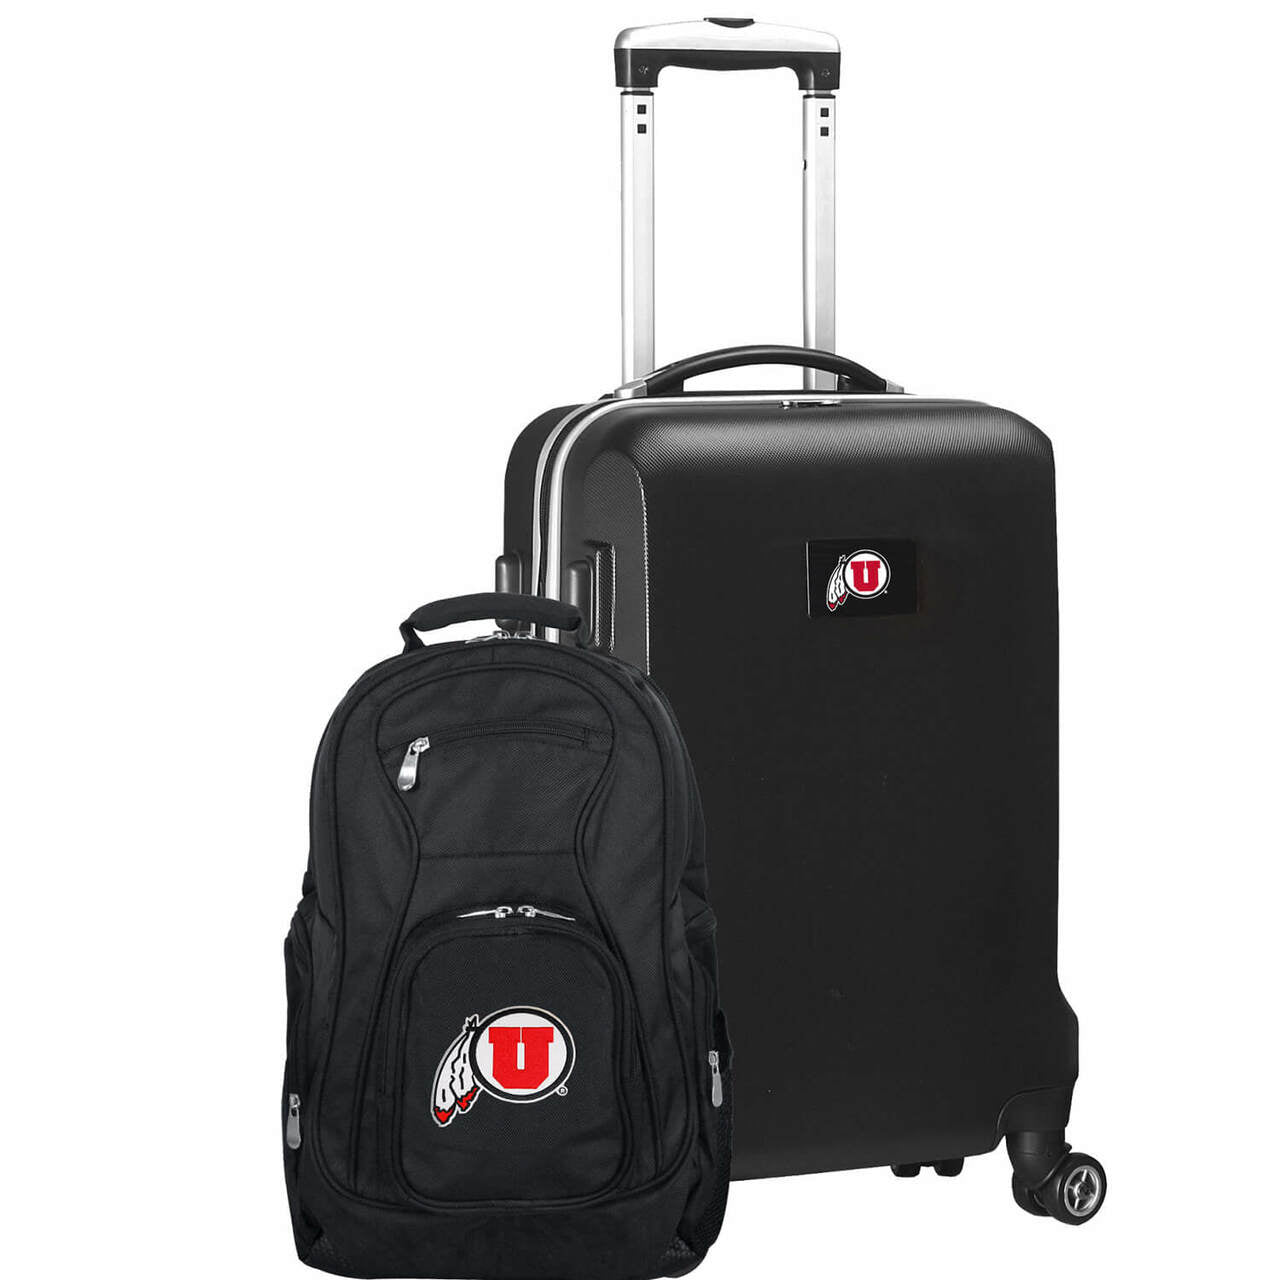 Utah Utes Deluxe 2-Piece Backpack and Carry on Set in Black